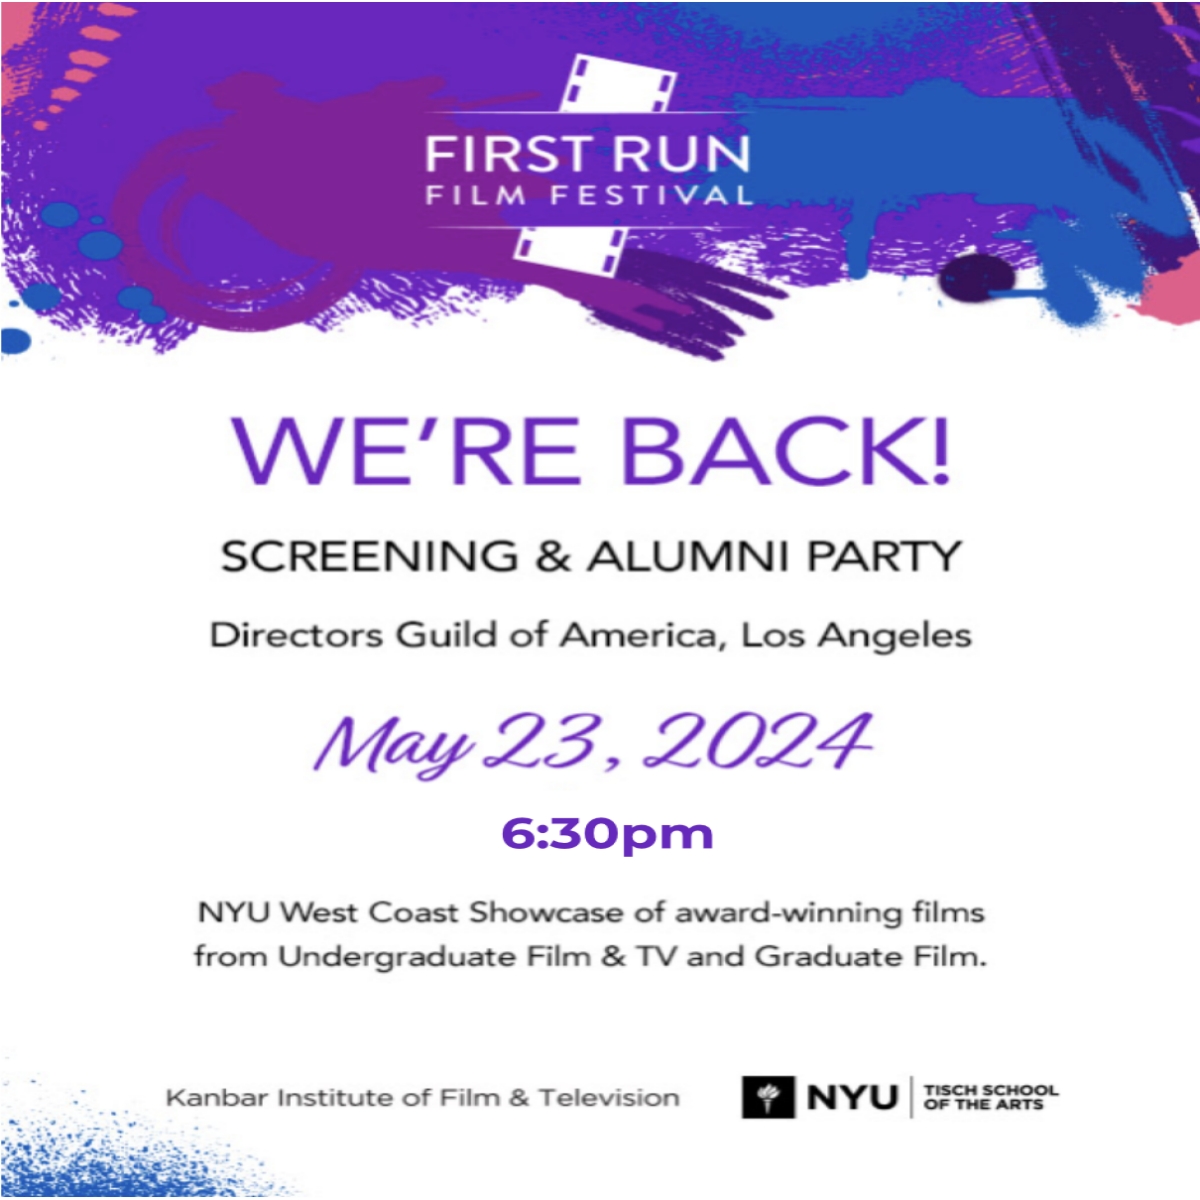 First Run Flyer with colorful purple and blue collage